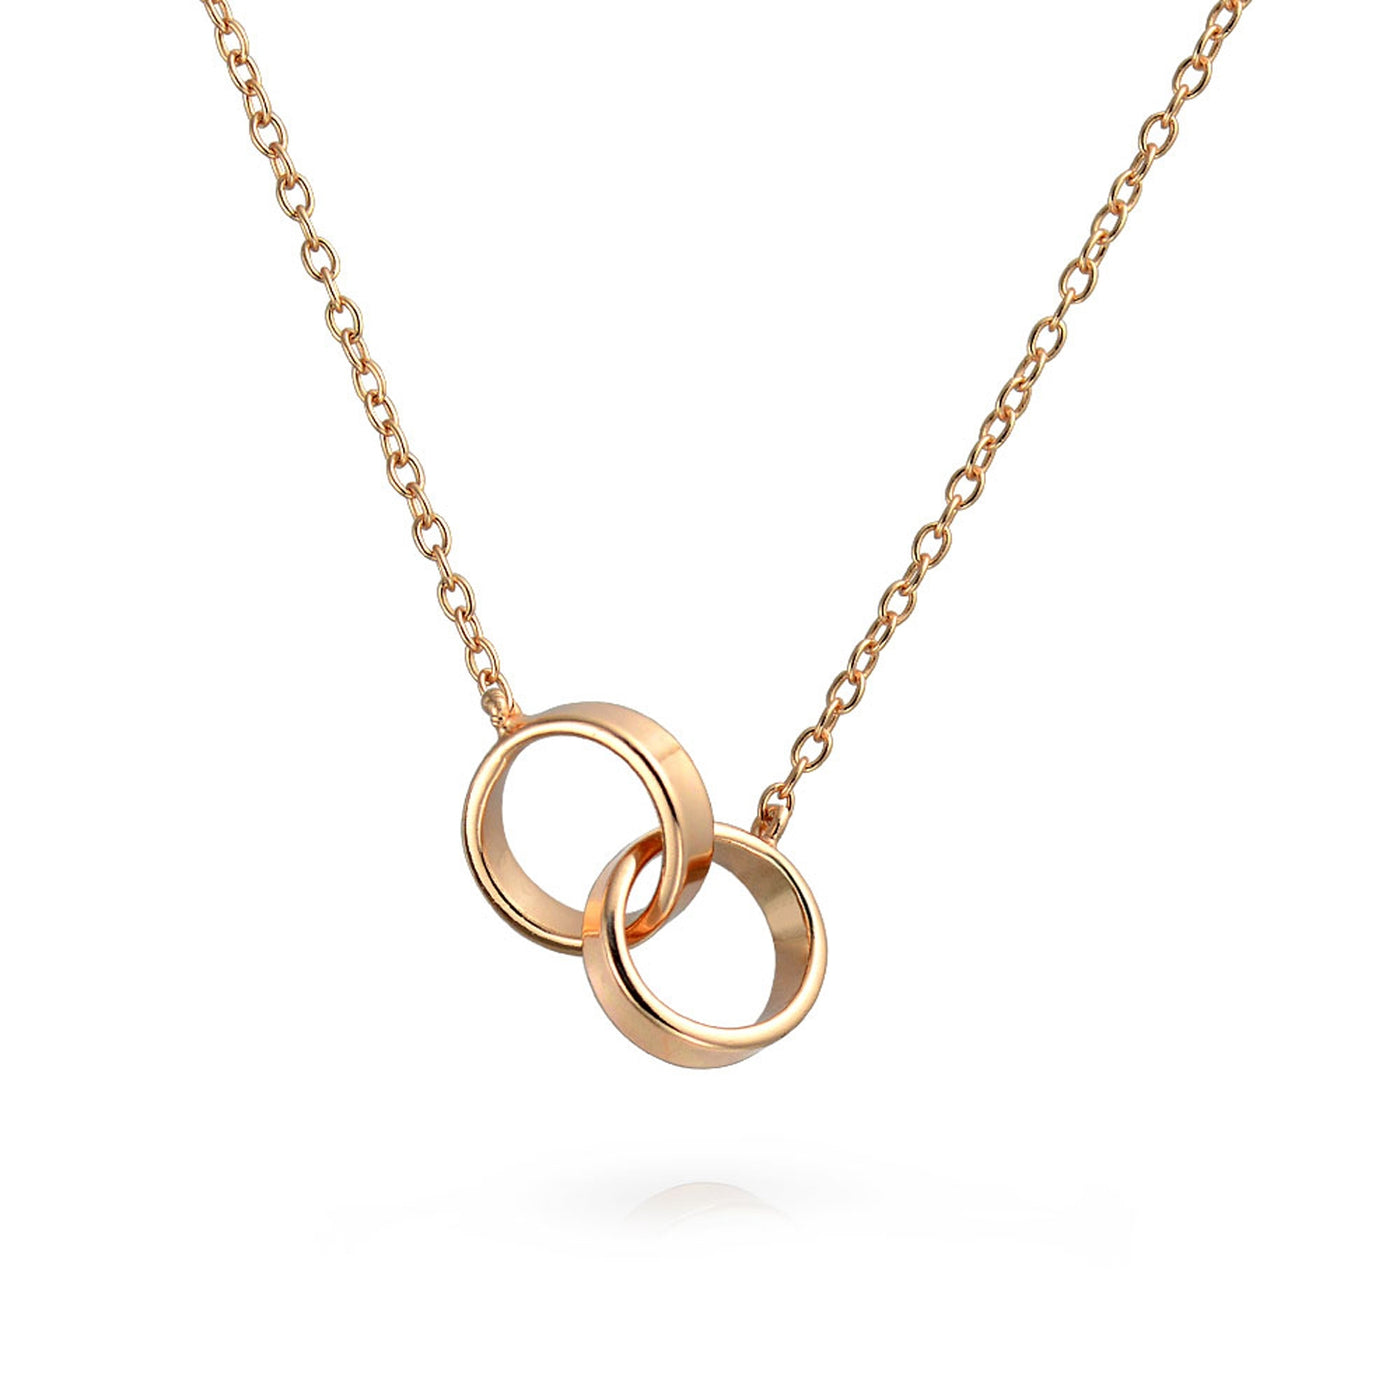 Best Friends Interlocking Rings Circle Necklace Rose Gold Plate Silver